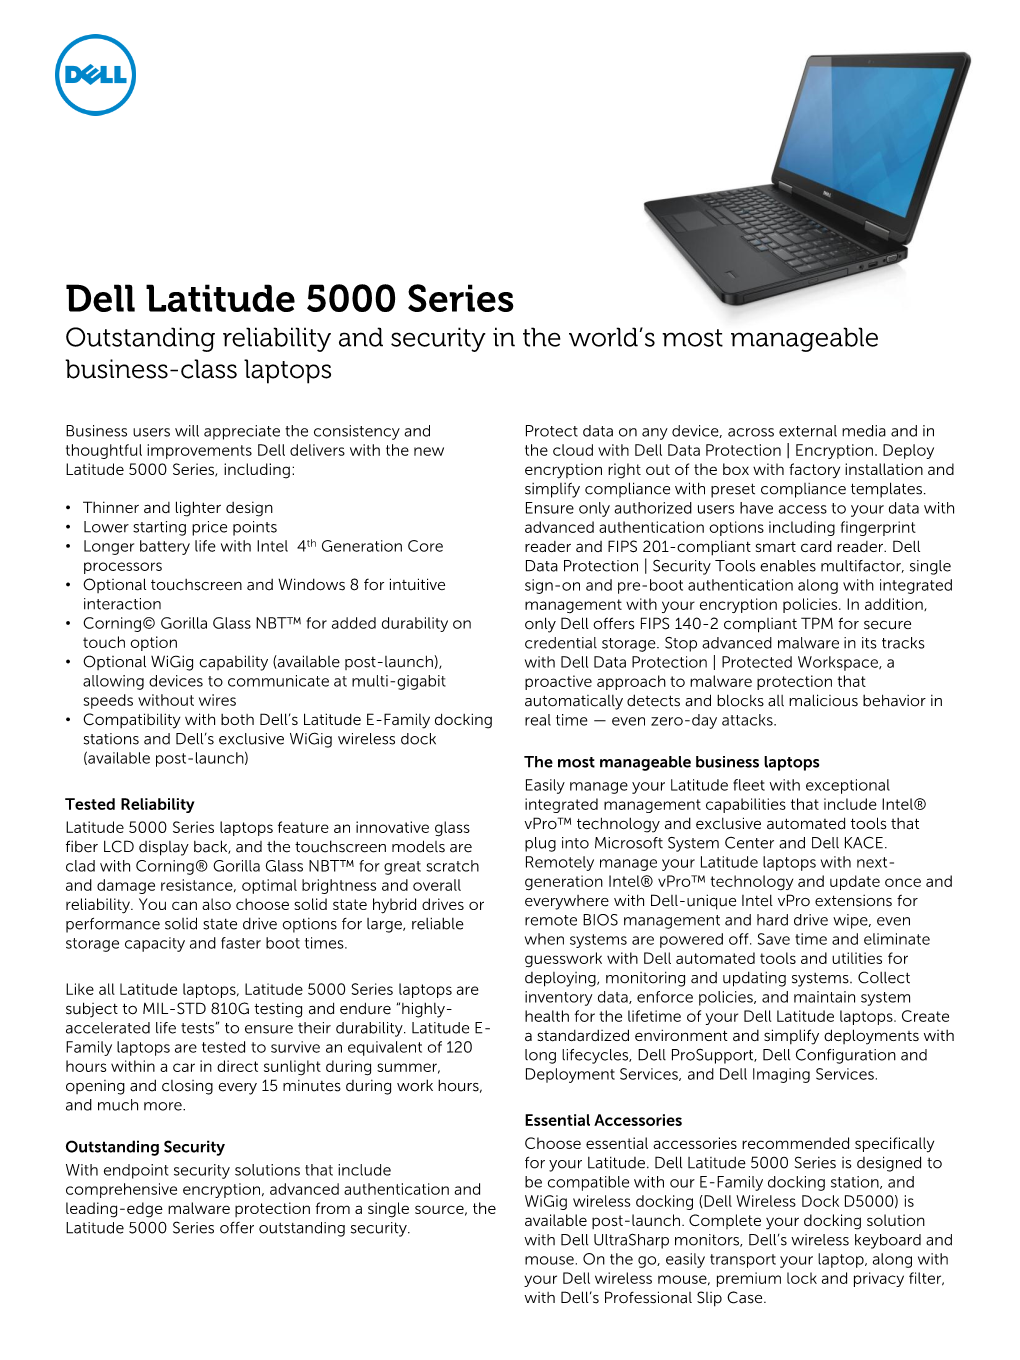 Dell Latitude 5000 Series Outstanding Reliability and Security in the World’S Most Manageable Business-Class Laptops